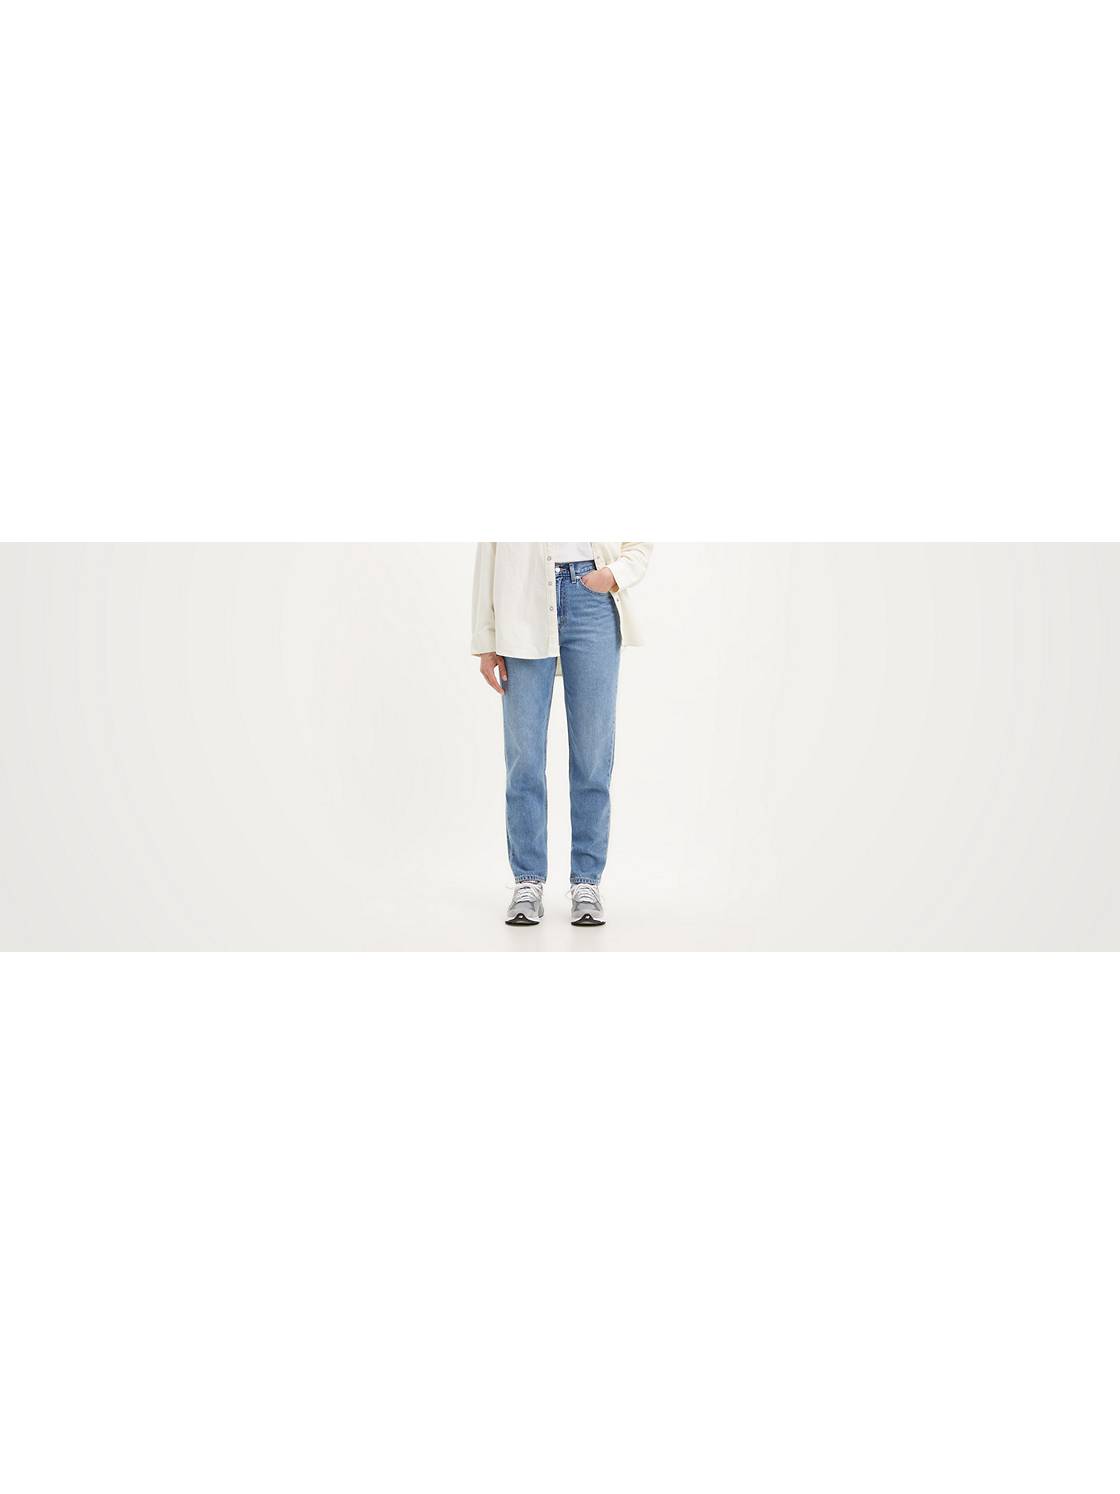 Women's Tapered Jeans, High Waisted Taper